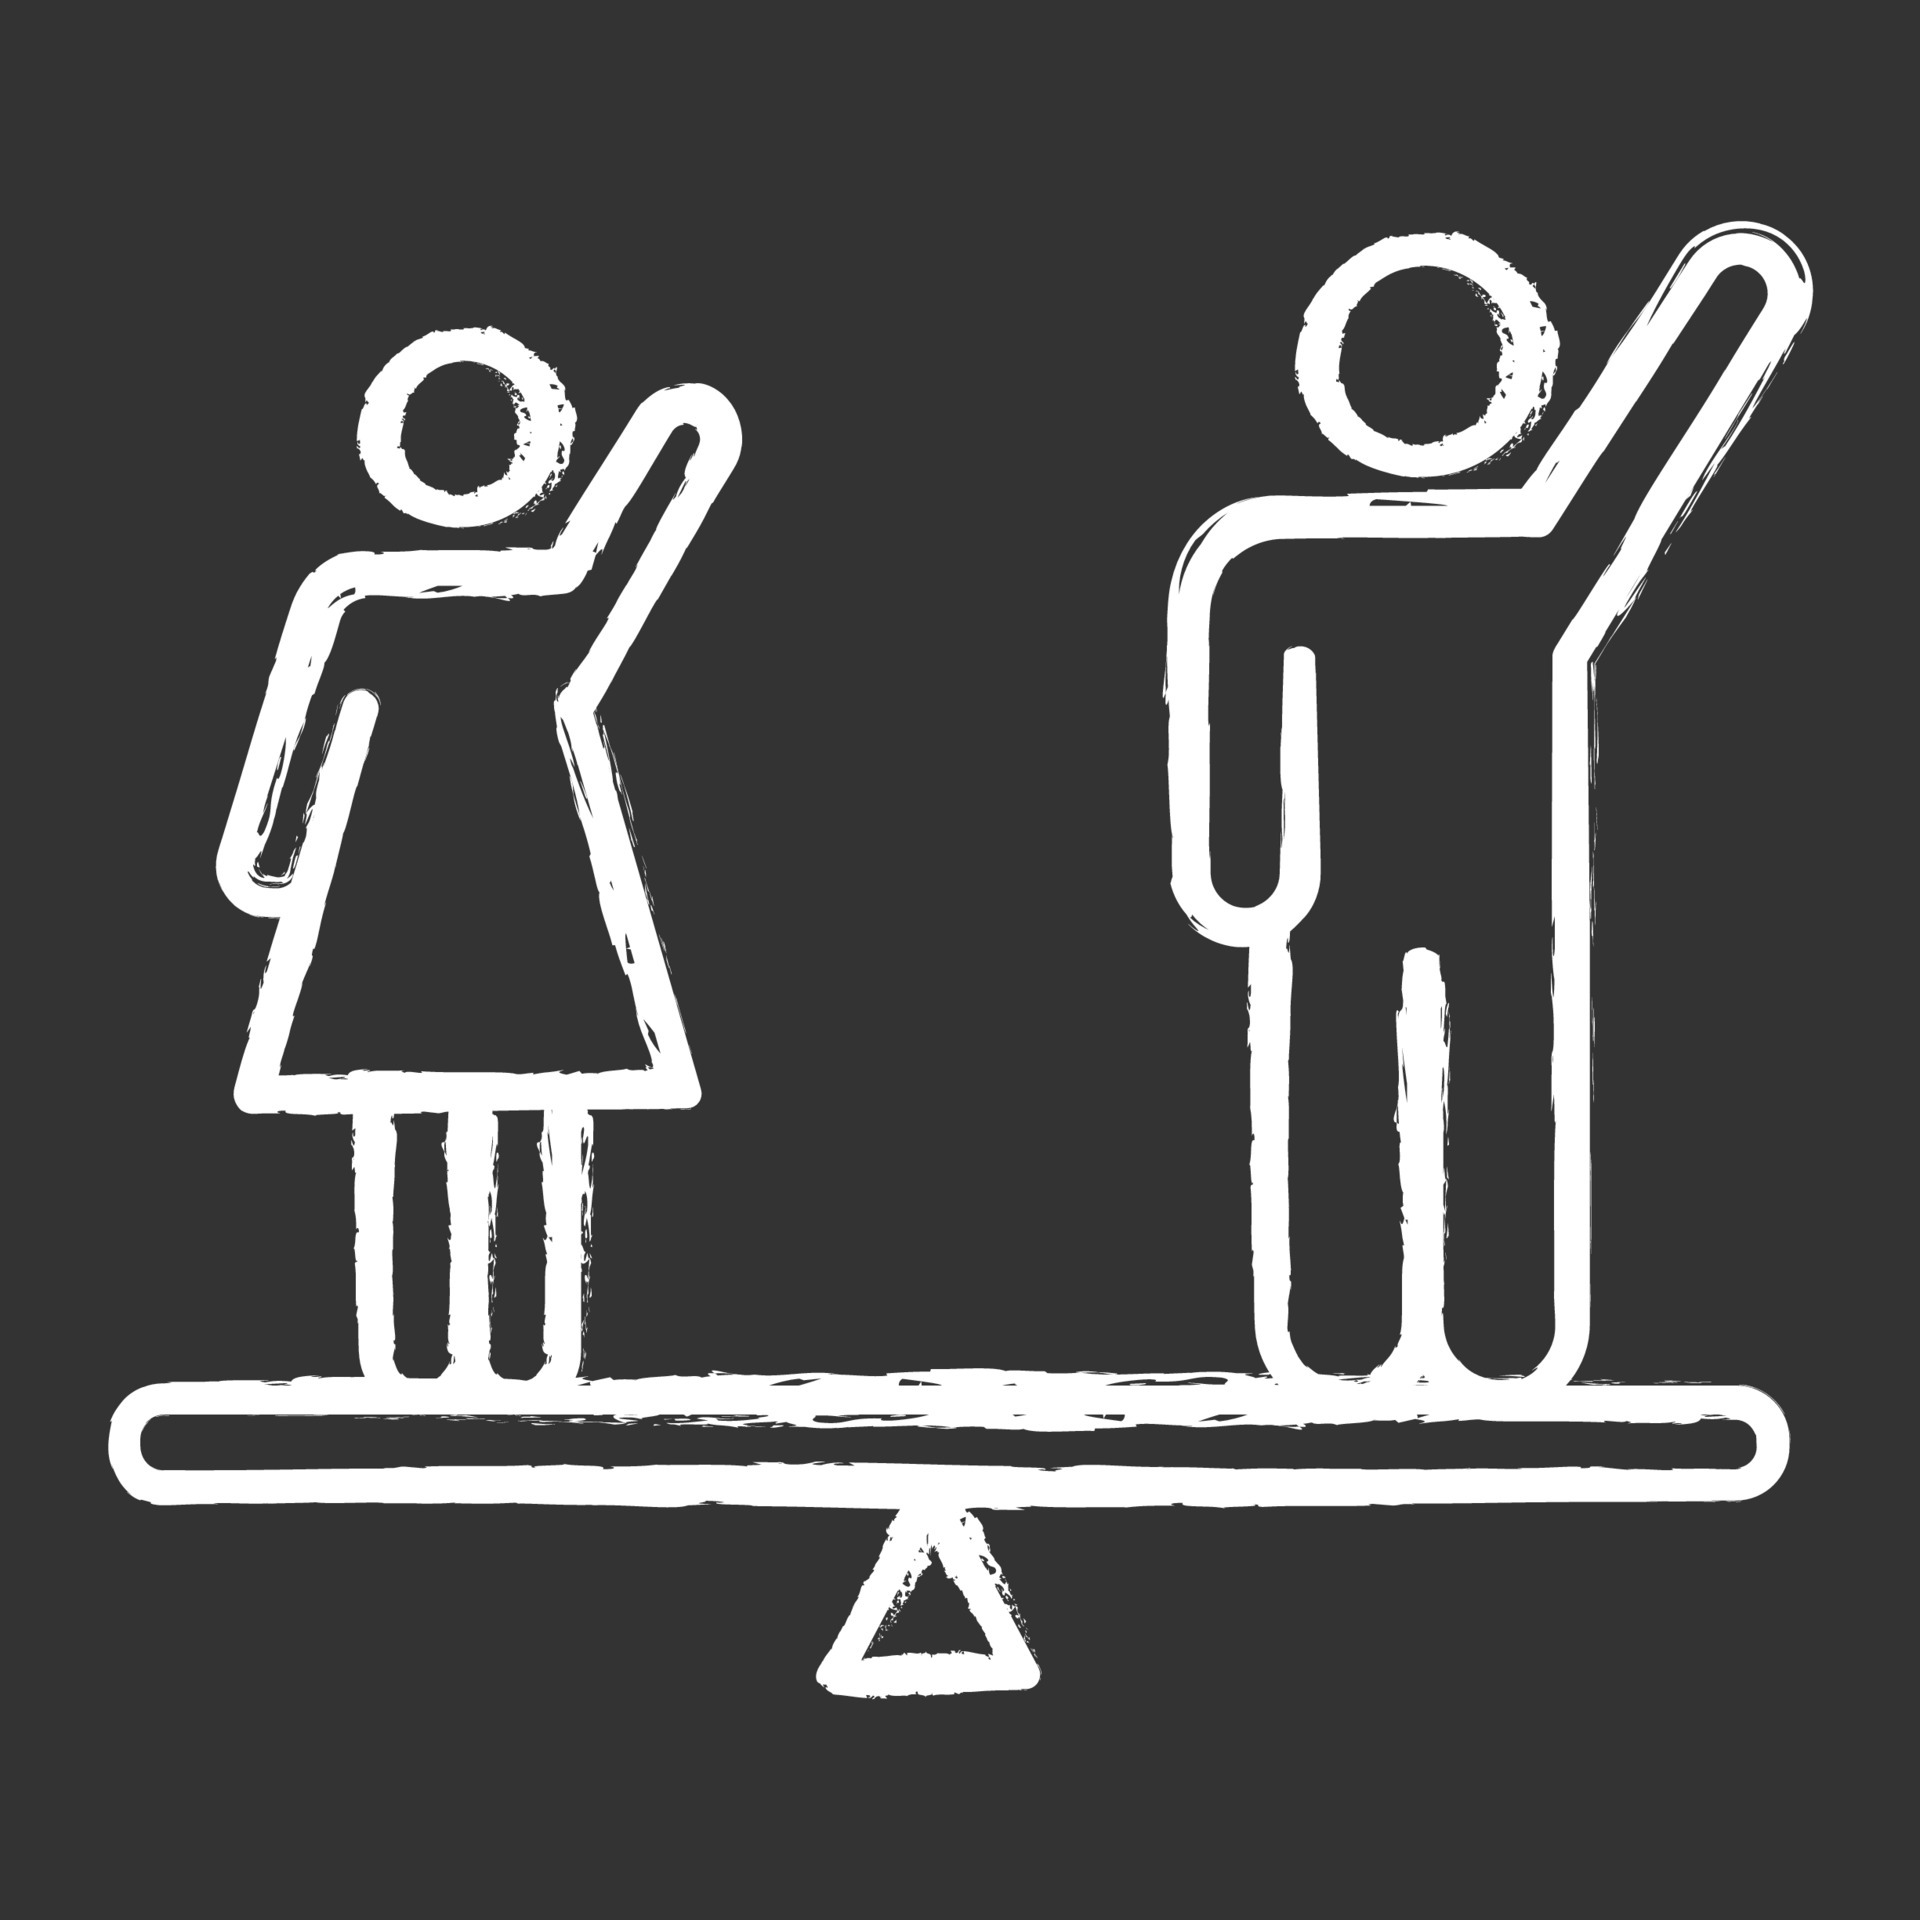 gender-equality-chalk-icon-woman-and-man-human-right-democracy-freedom-female-male-balancing-on-scale-justice-equality-empowerment-social-unity-isolated-chalkboard-illustration-vector Human Rights: Empowering Equality and Justice